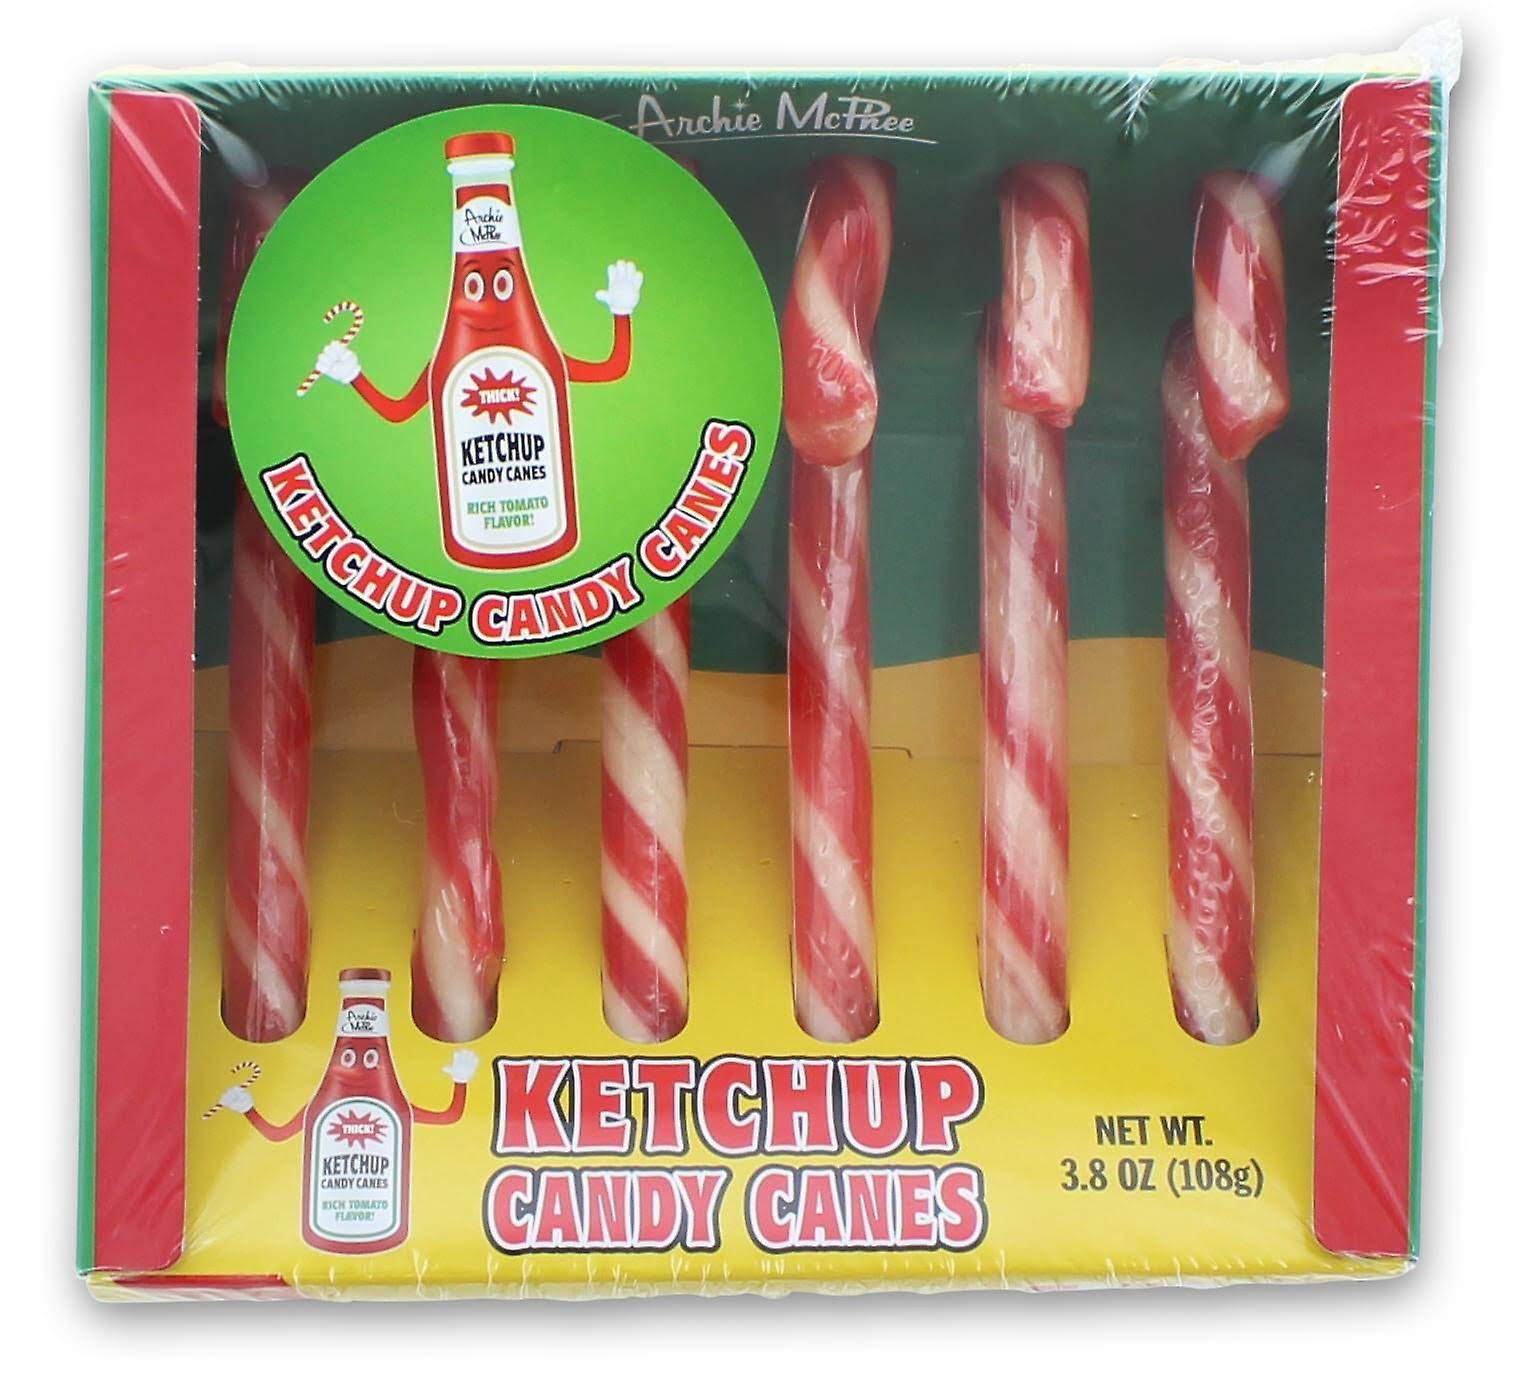 Accoutrements Ketchup flavored candy canes § 6 piece gift set